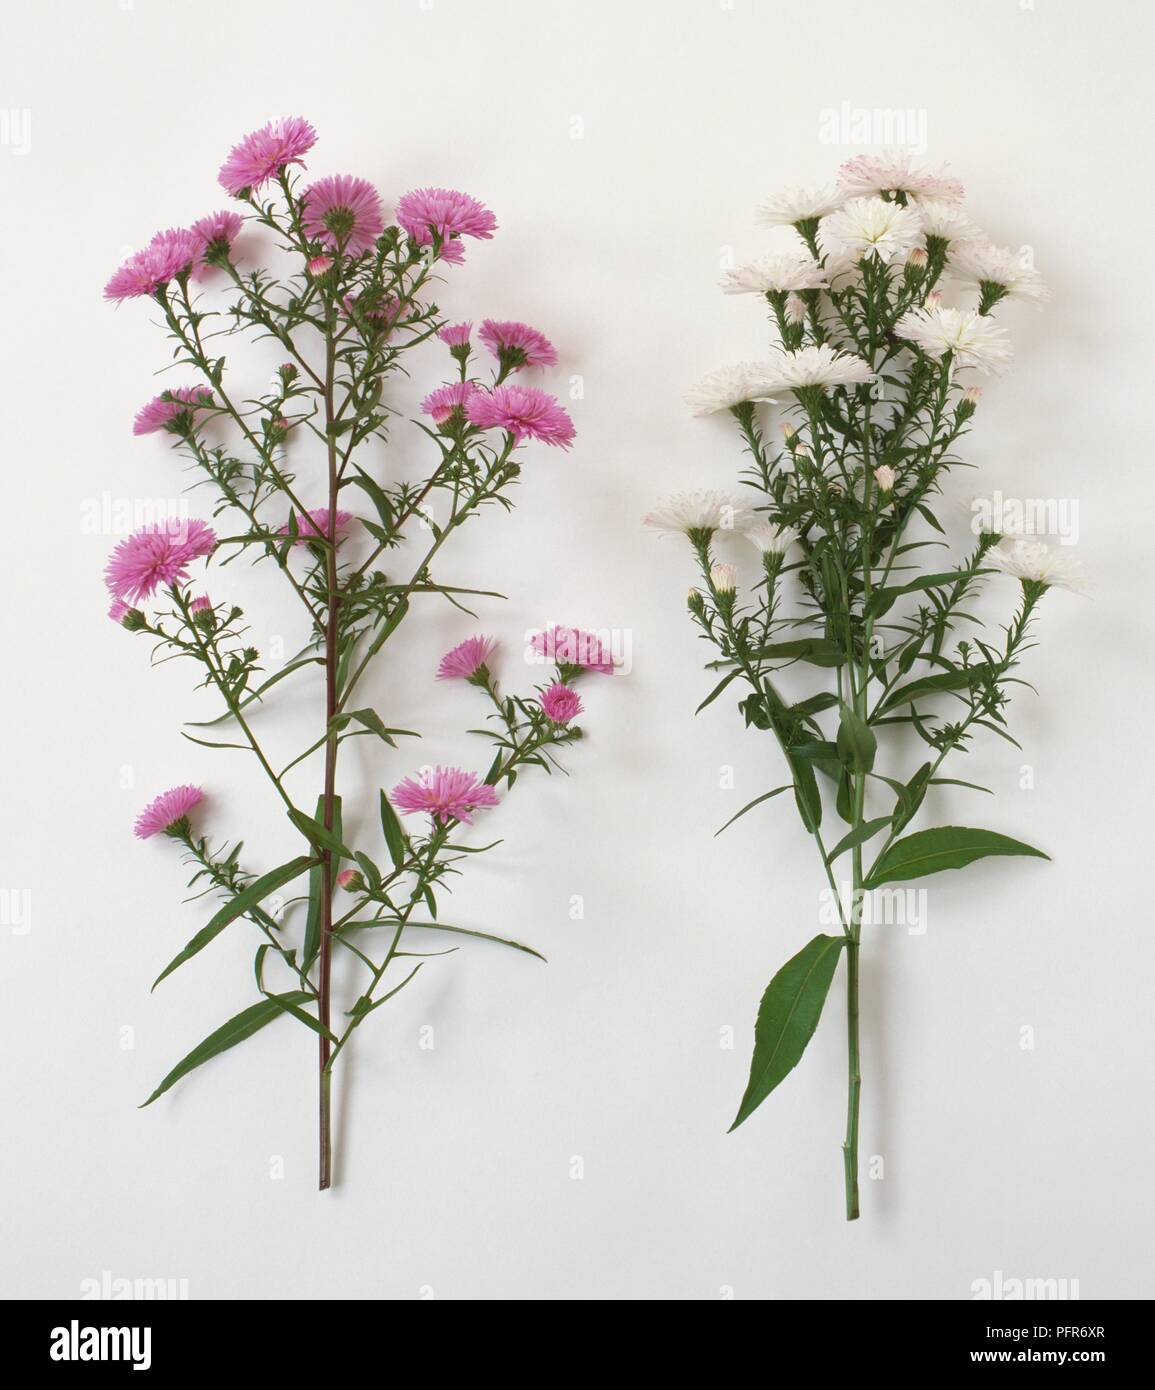 Aster novi-belgii 'Blandie' (Michaelmas Daisy) with white flowers, and Aster novi-belgii 'Ada Ballard' with pink flowers and green leaves on long stems Stock Photo